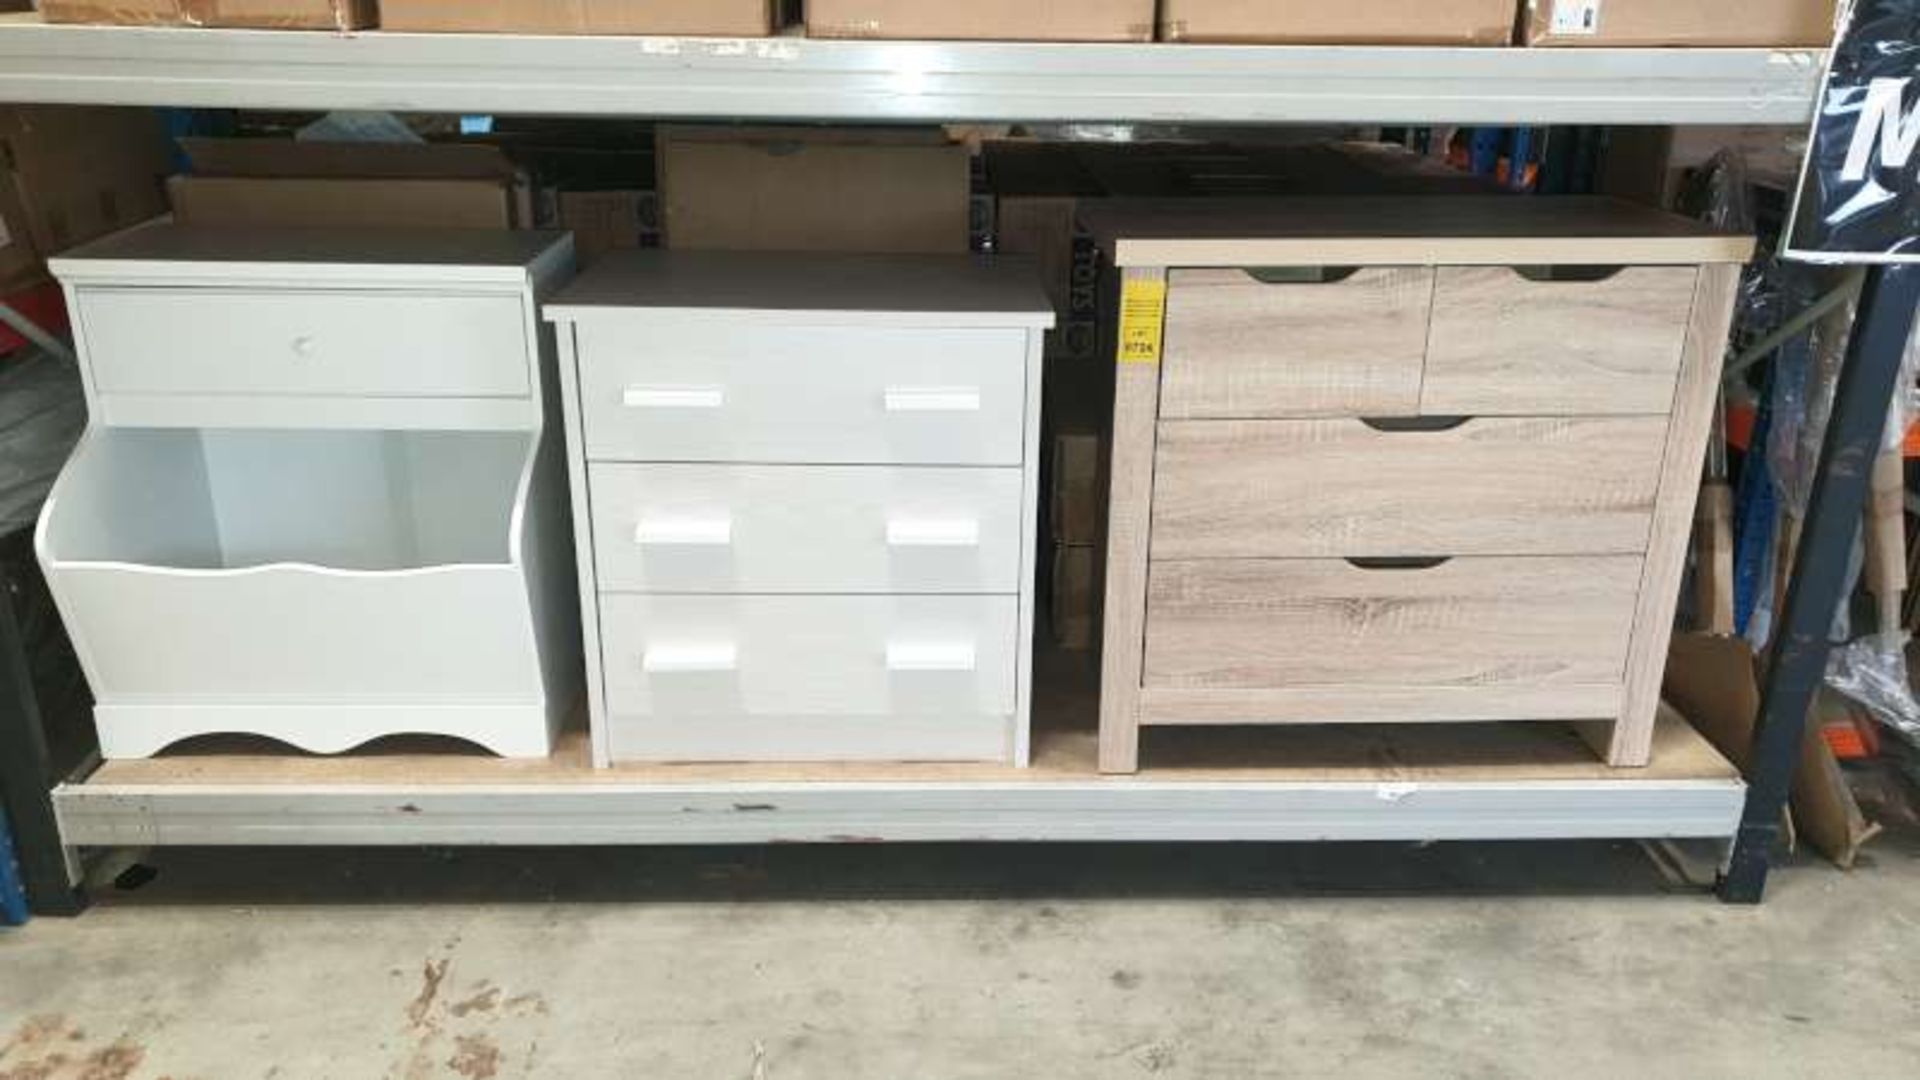 LOT CONTAINING 4 X DRAWER CHEST, 3 X 3 DRAWER CHESTS AND 3 X CHILDRENS TOY STORAGE